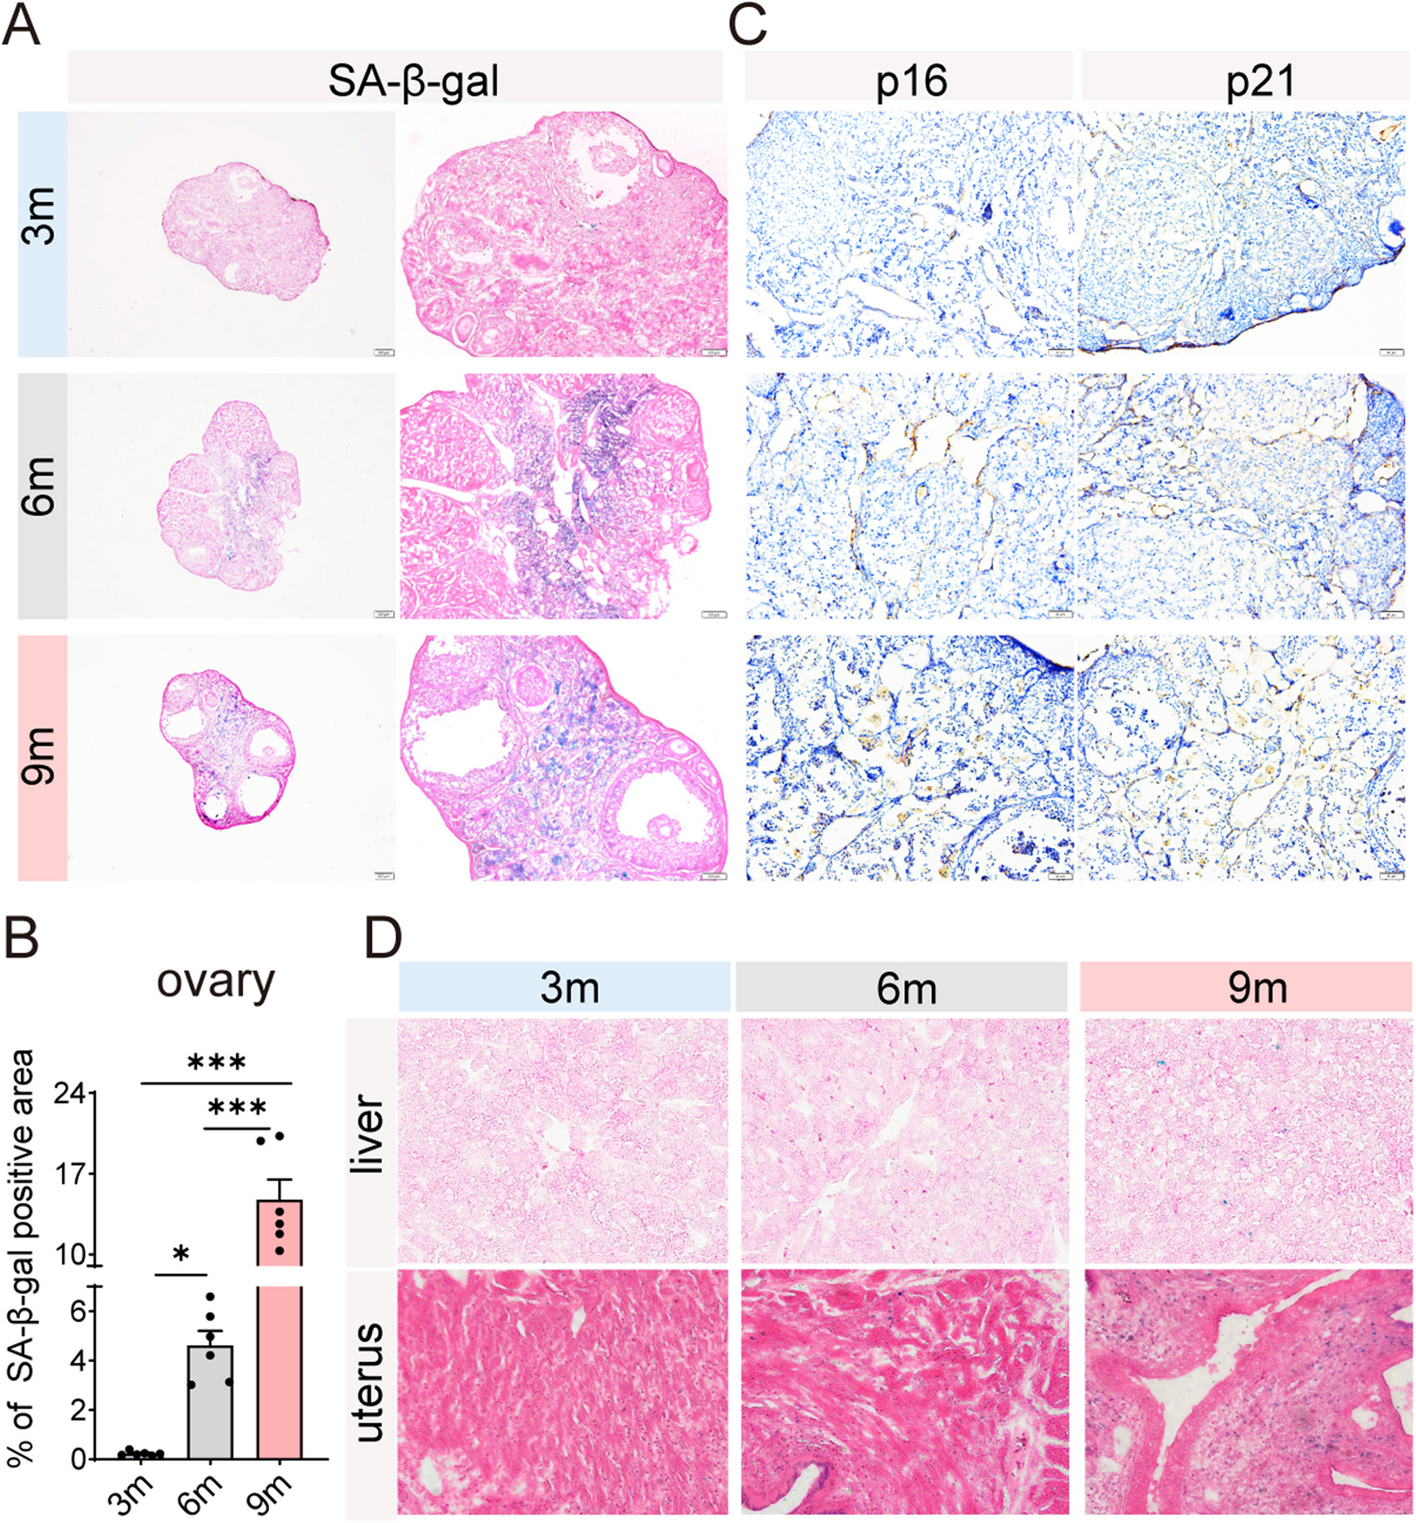 Chitosan alleviates ovarian aging by enhancing macrophage phagocyte-mediated tissue homeostasis